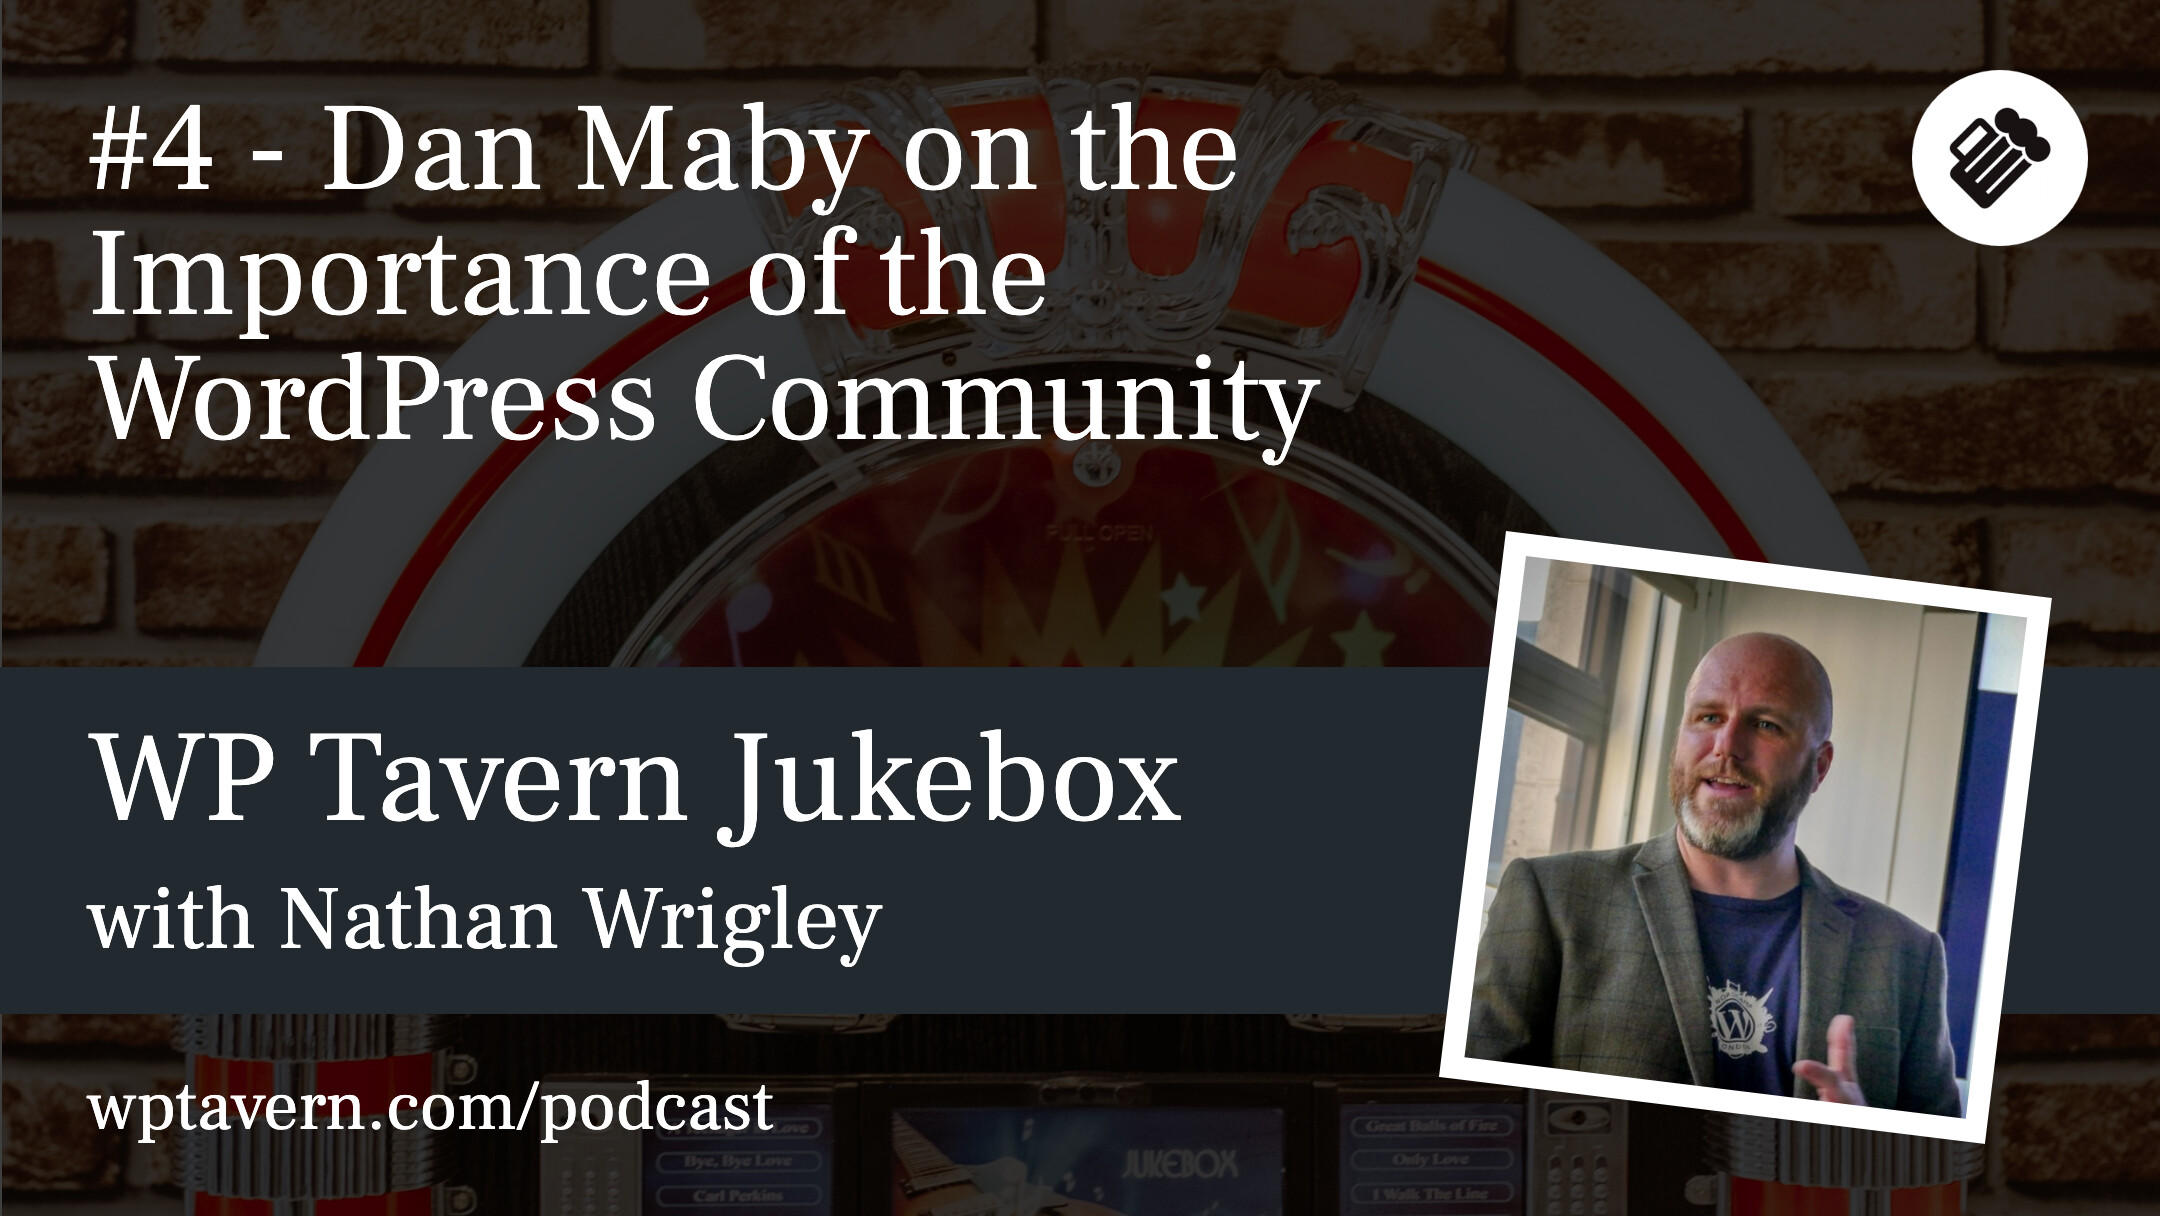 #4 - Dan Maby on the Importance of the WordPress Community